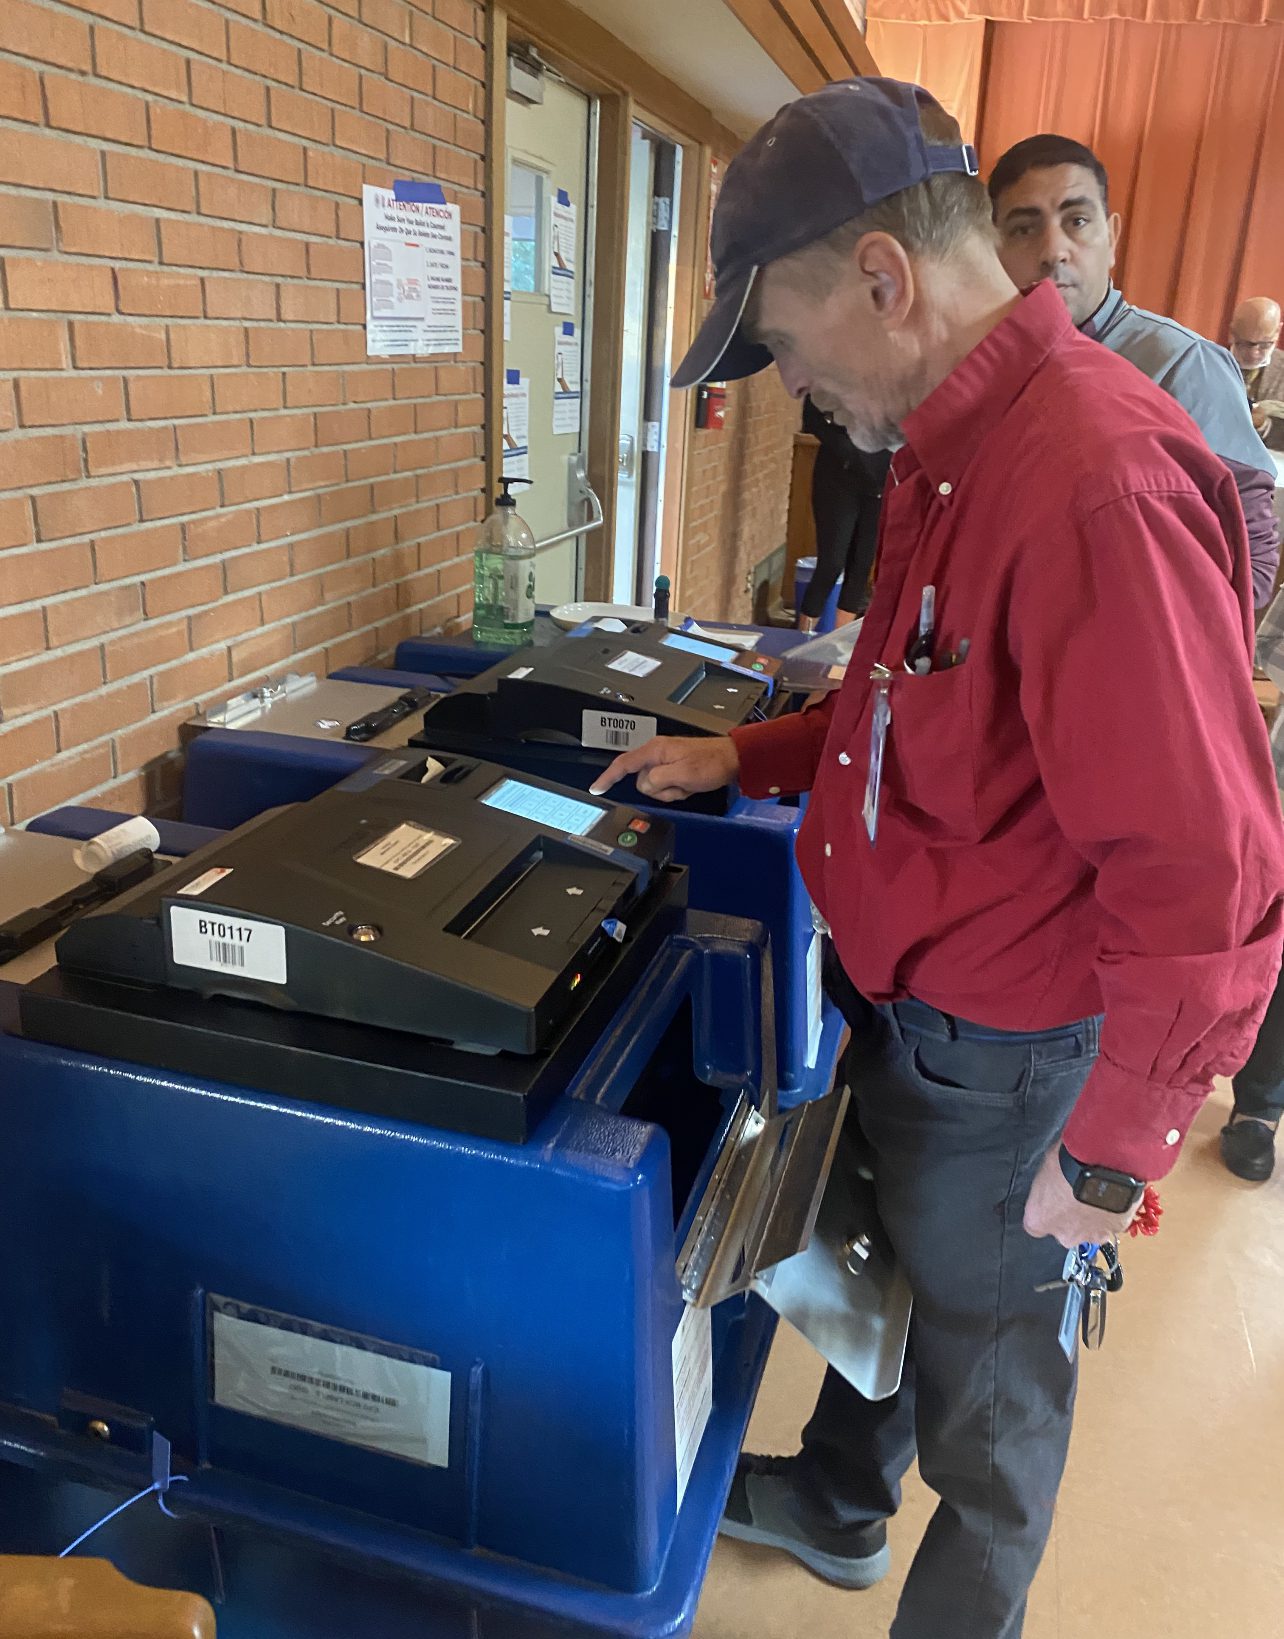 “Nothing Is Working” – Arizona Poll Worker Responds to Maricopa County Tabulator Issues – Issues with Machines are Now Reported in Wickenburg, AZ(VIDEO)